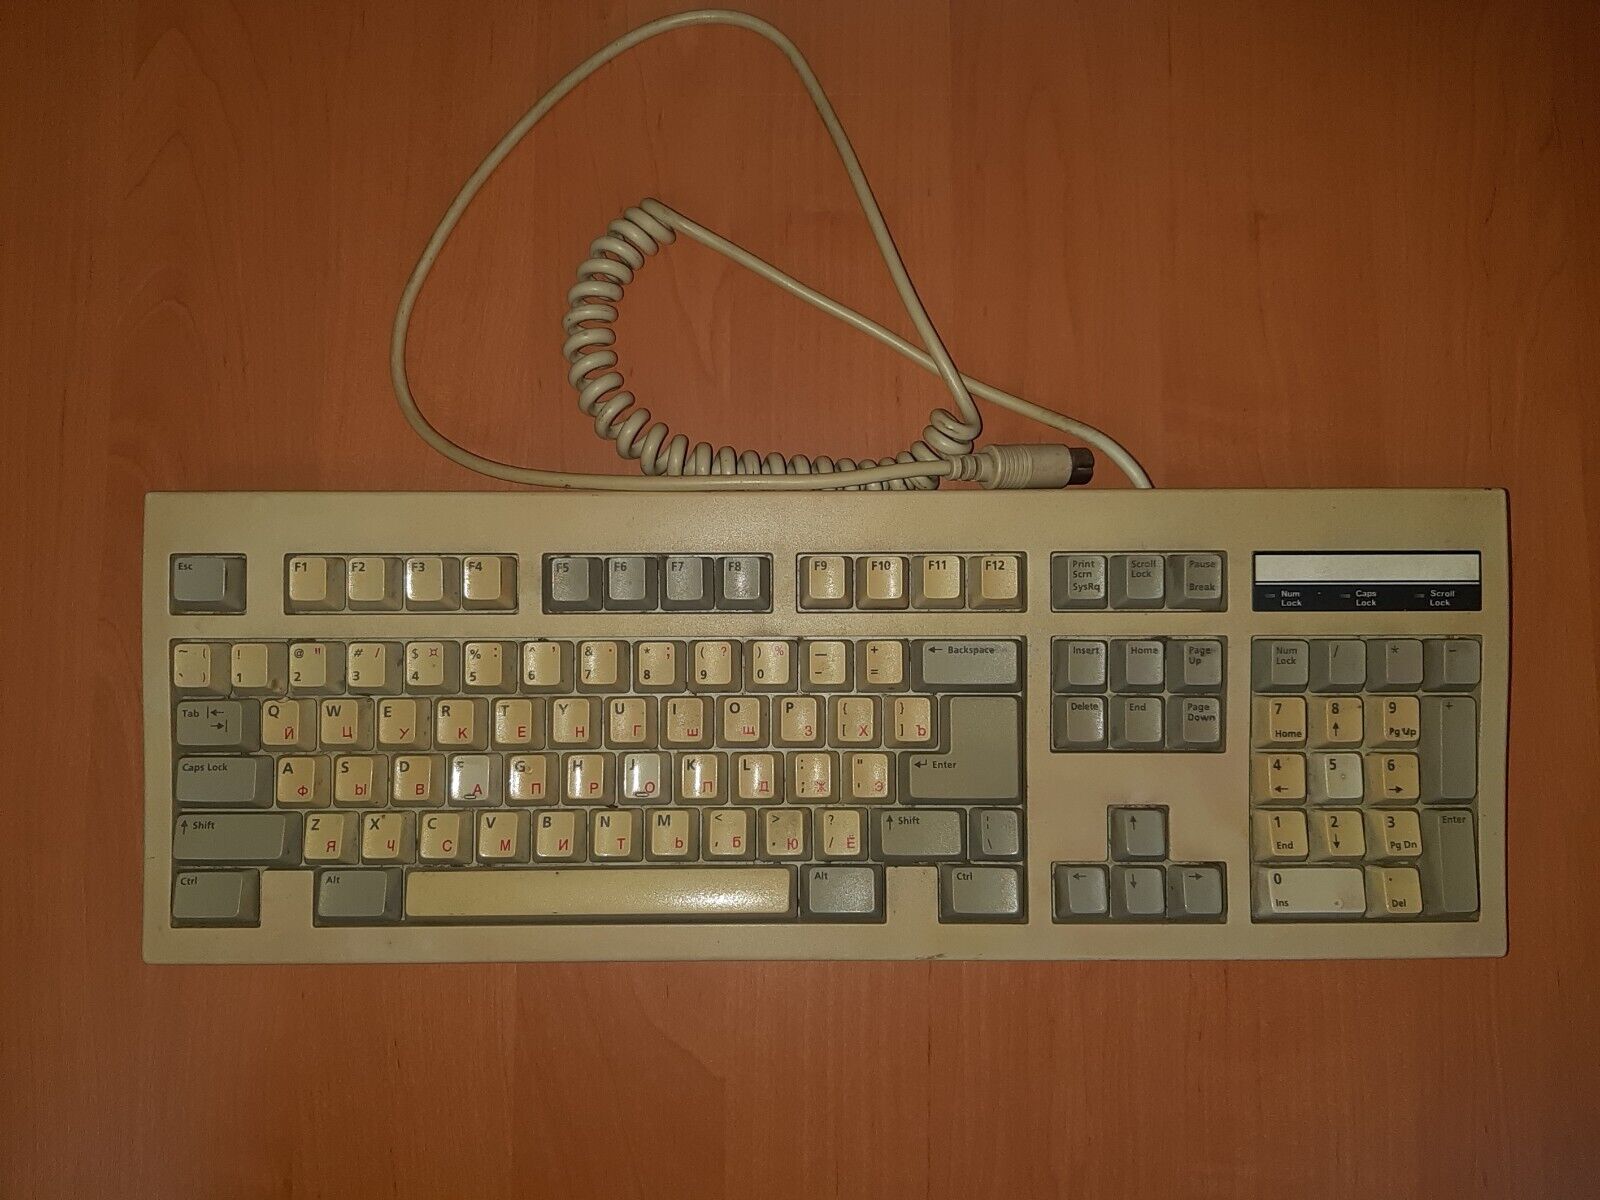 Very antique keyboard, circa 1980-1990. Selling as non-working for spare parts.